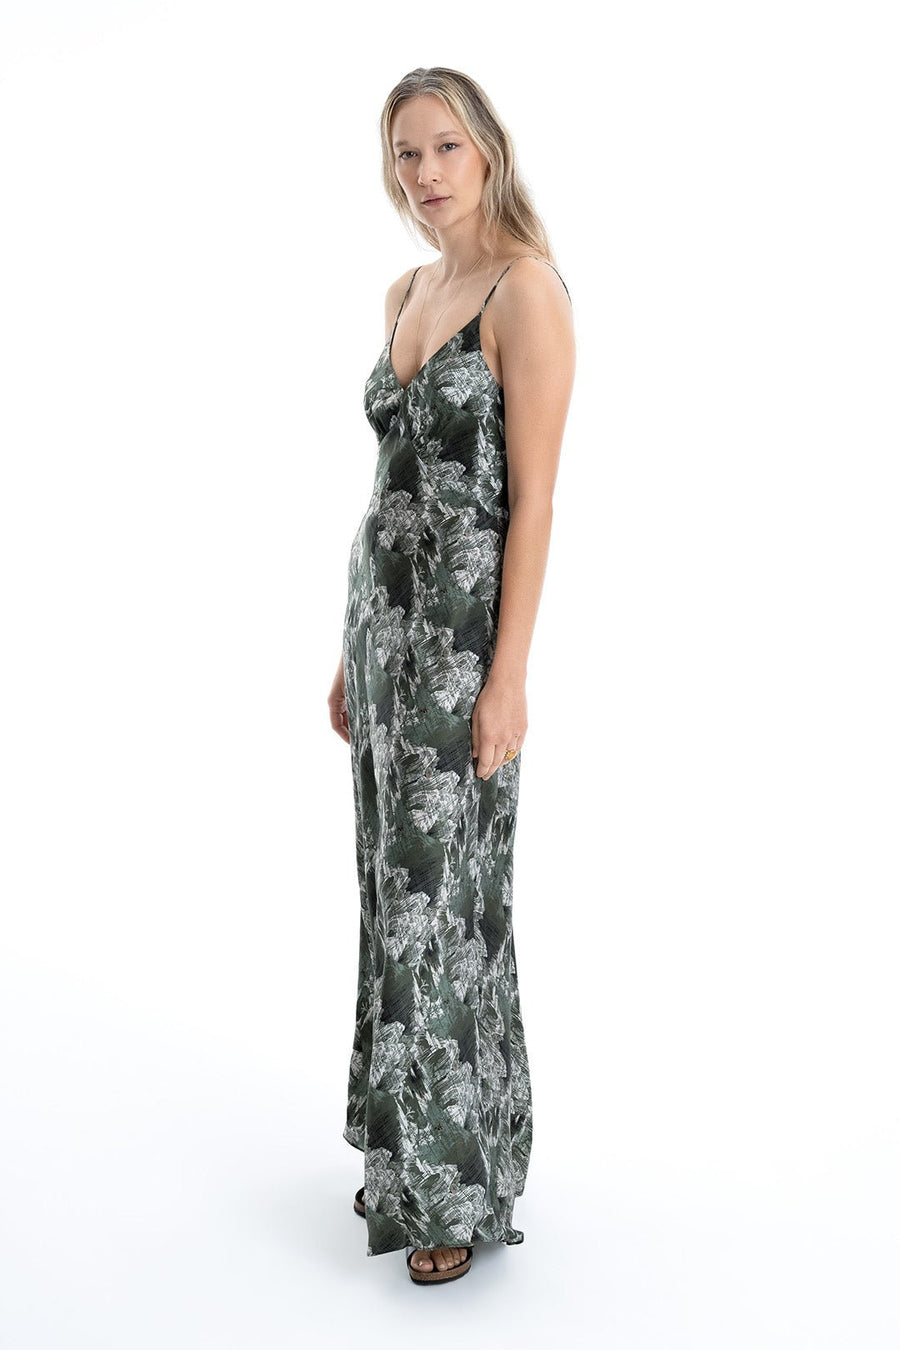 OASIS BIAS MAXI DRESS, MEADOW - Burning Torch Online Boutique